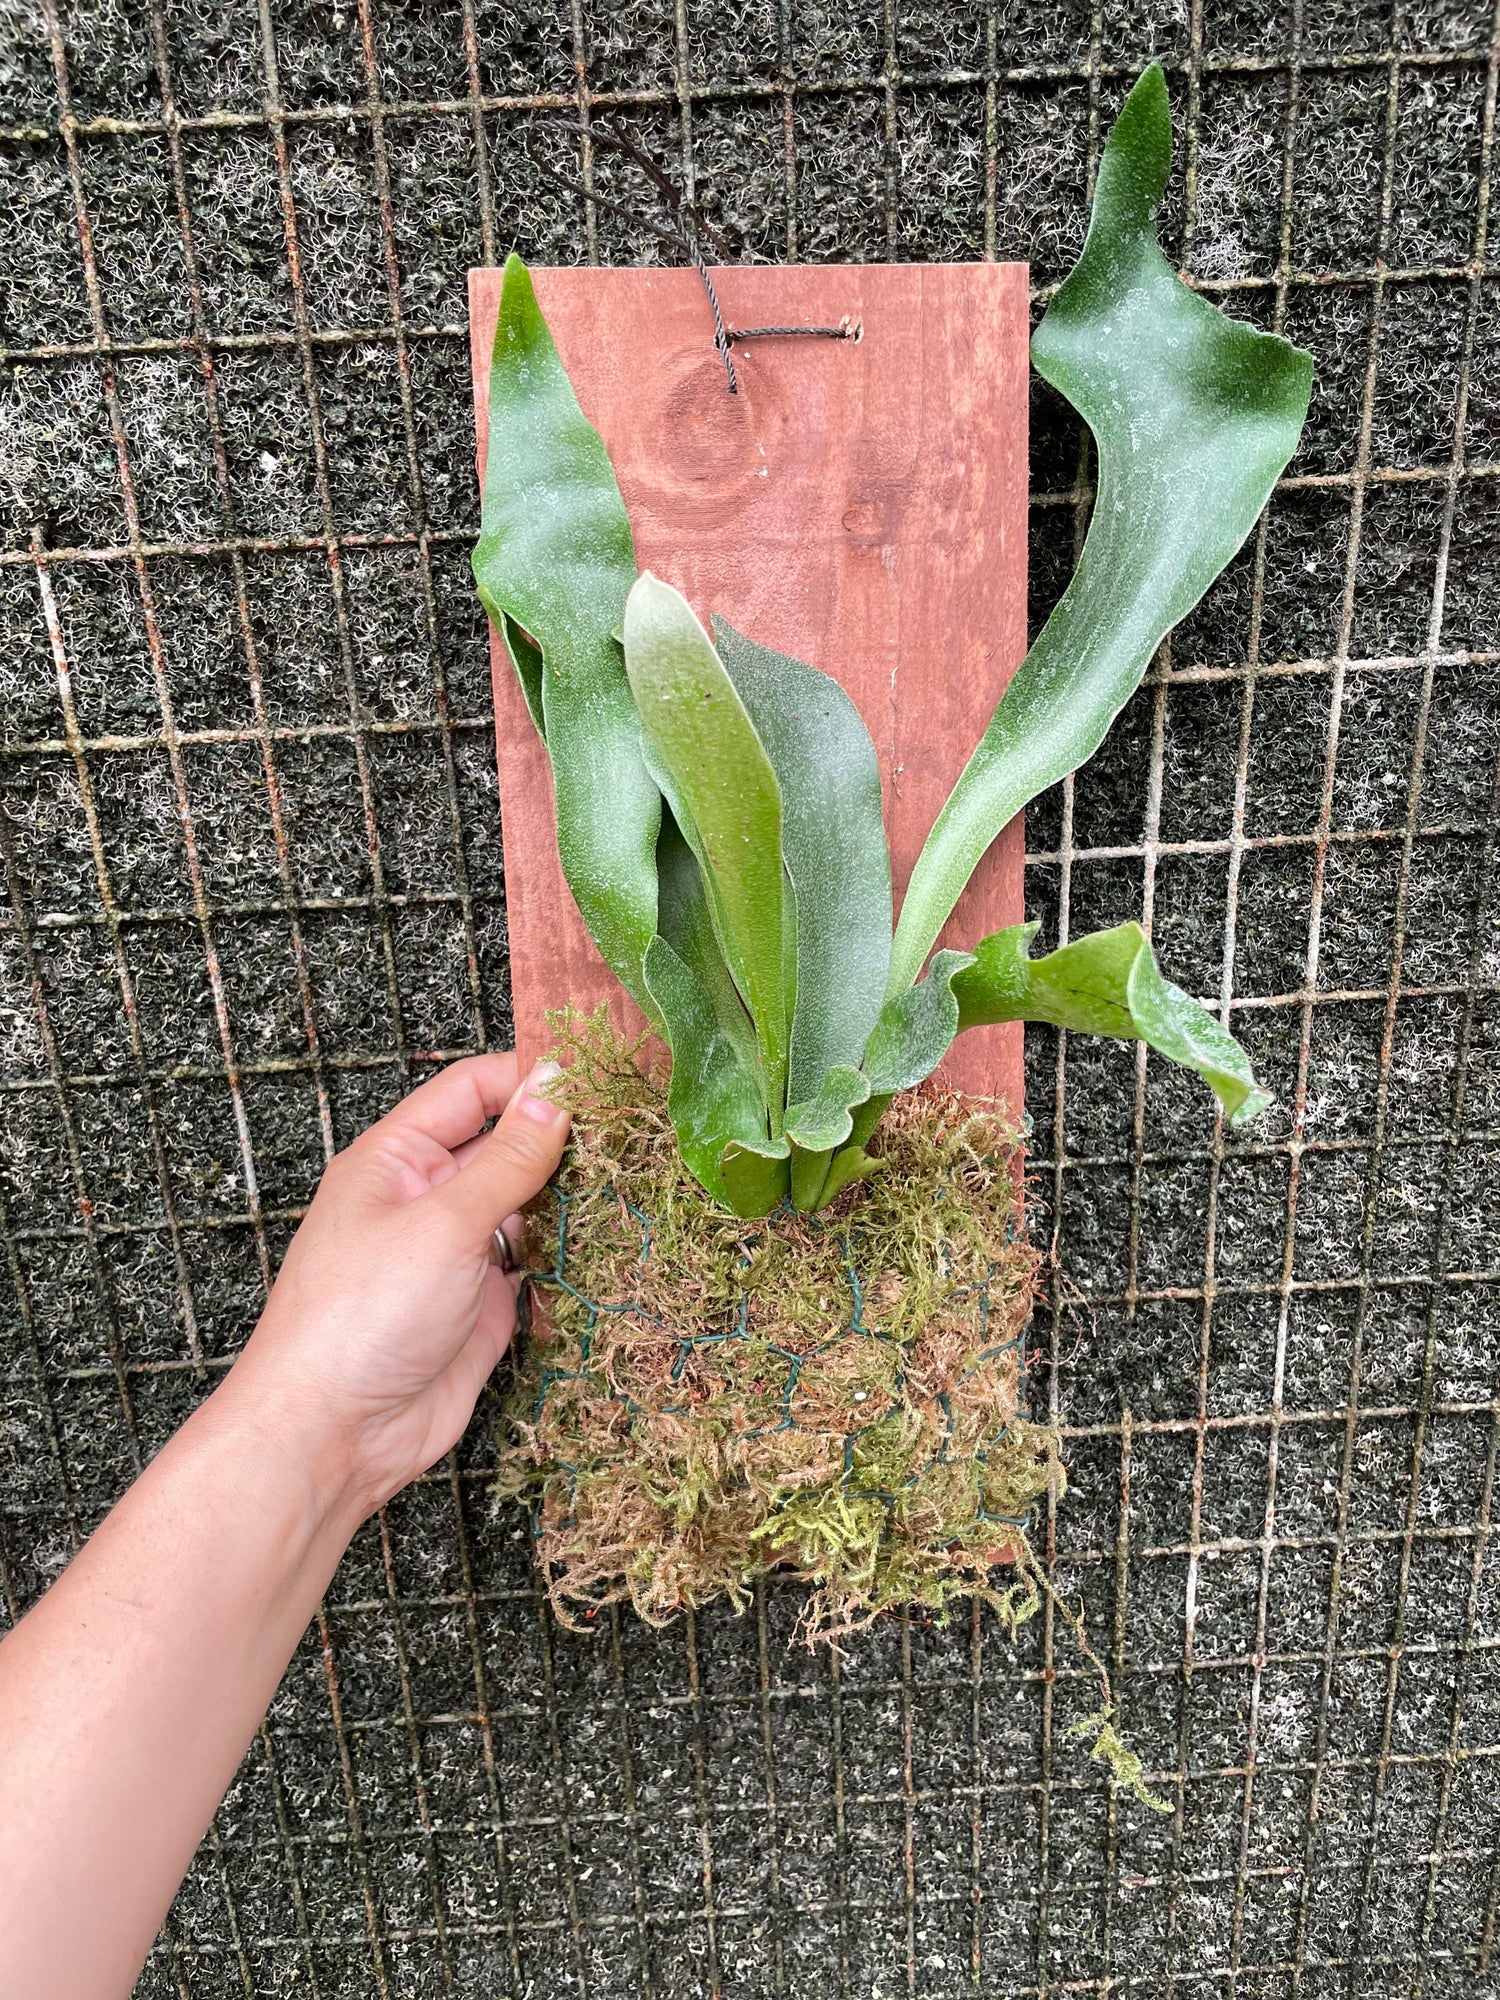 Mounted Staghorn fern on red wood - similar to photo not exact-Platycerium bifurcatum-elkhorn fern -easy care